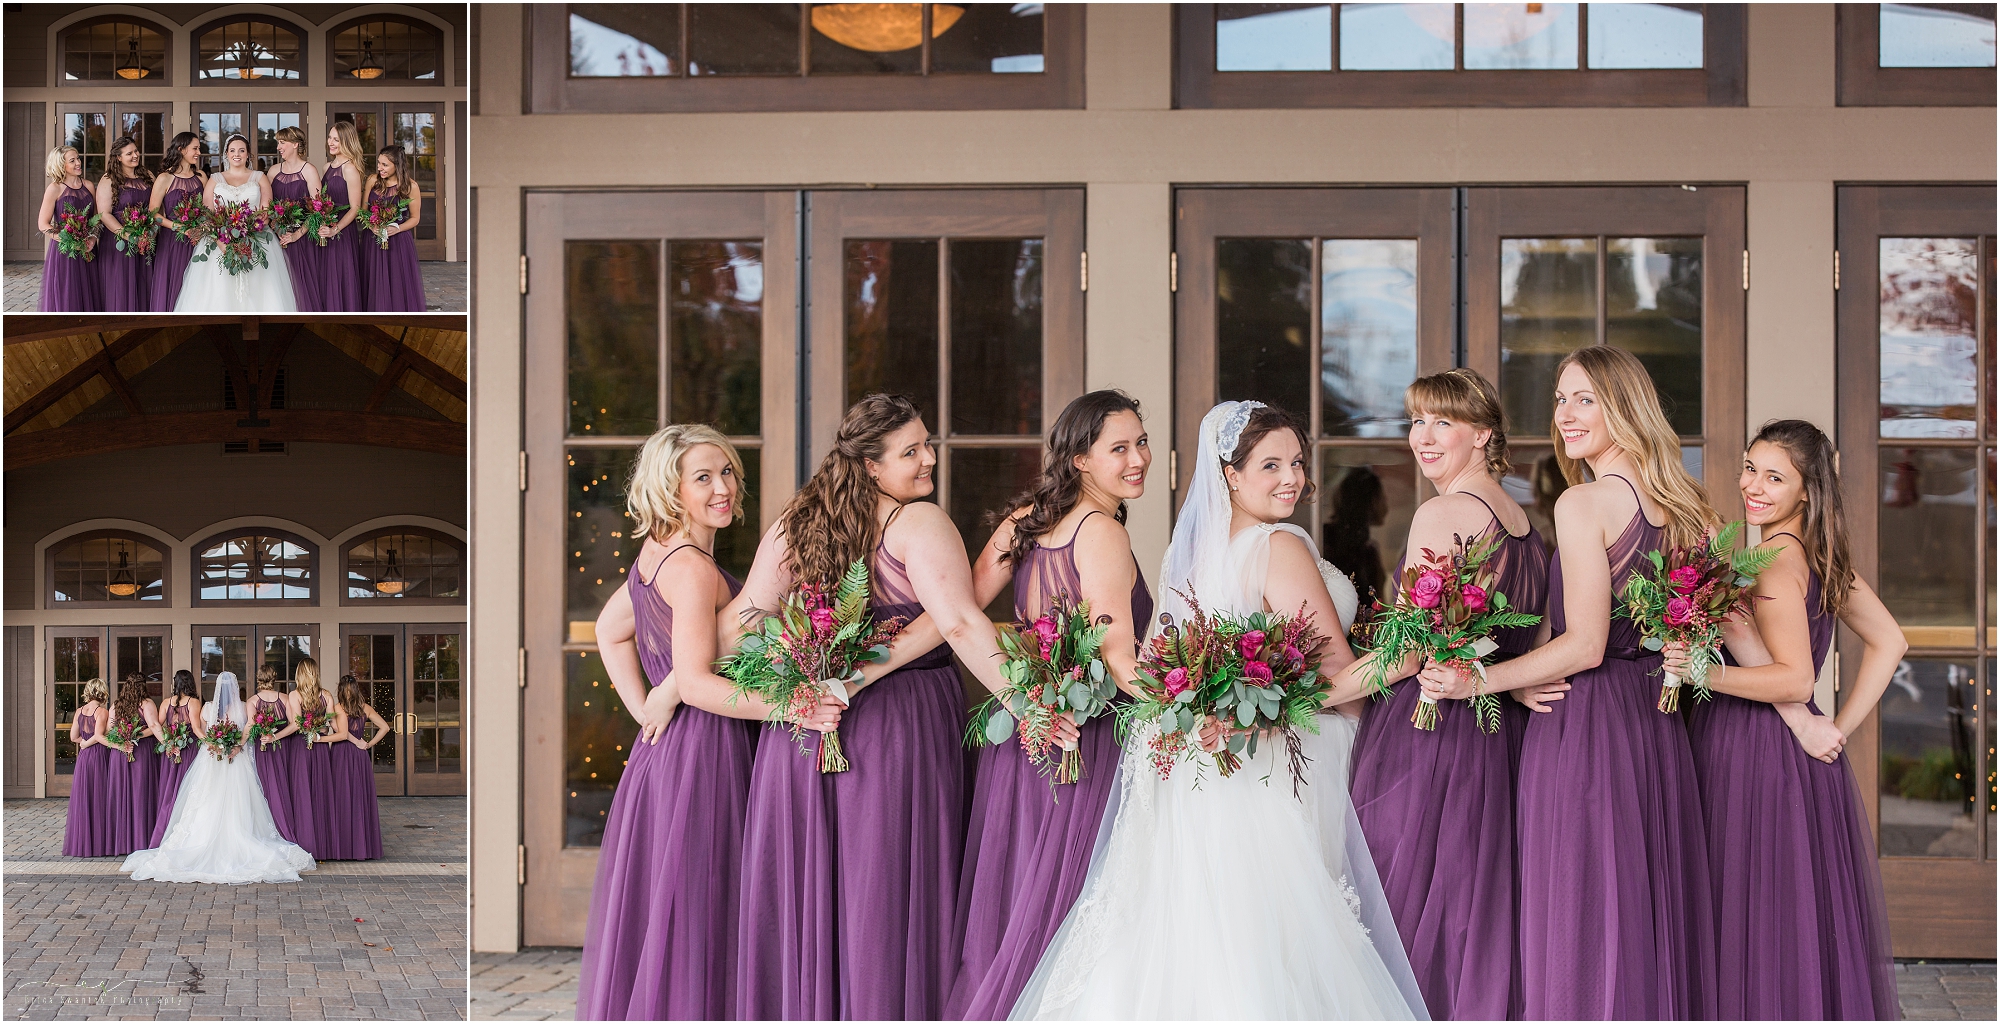 Beautiful bridesmaids at this winter woodland wedding in Bend, OR. 